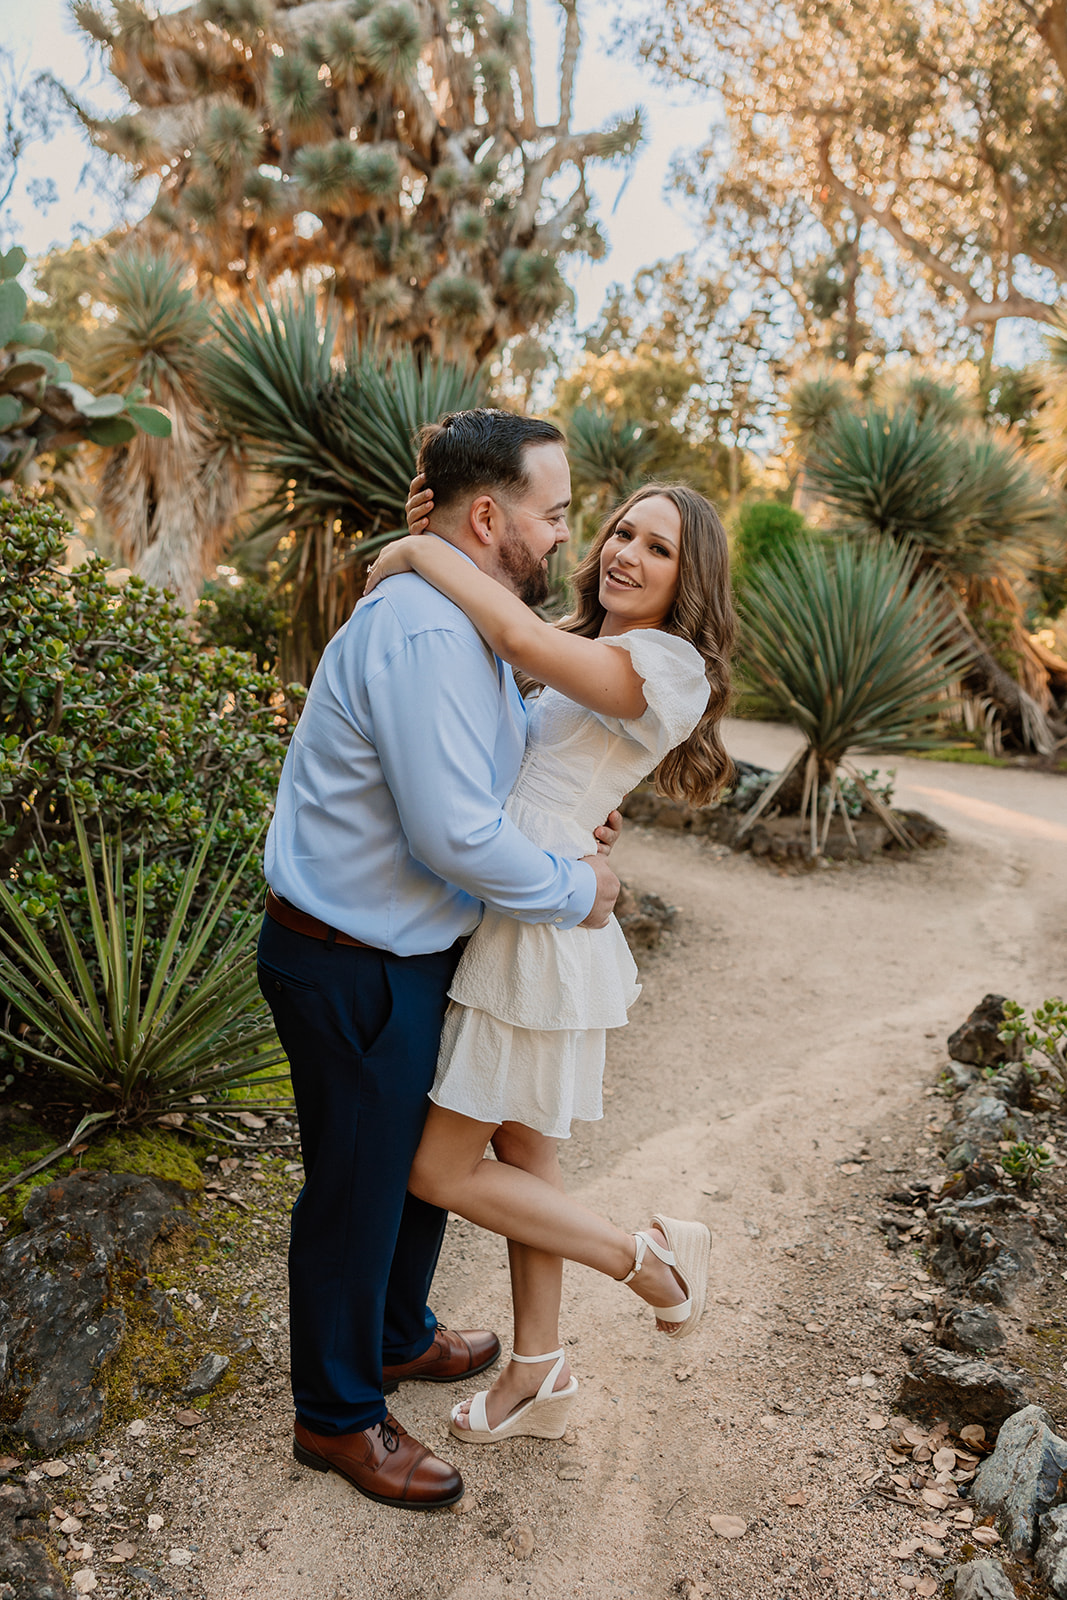 A man and woman stand on a dirt path in a garden, sharing a kiss. The man is in a blue shirt and dark pants, and the woman is in a white dress. Greenery and various plants surround them for their engagement photos at cactus garden in stanford